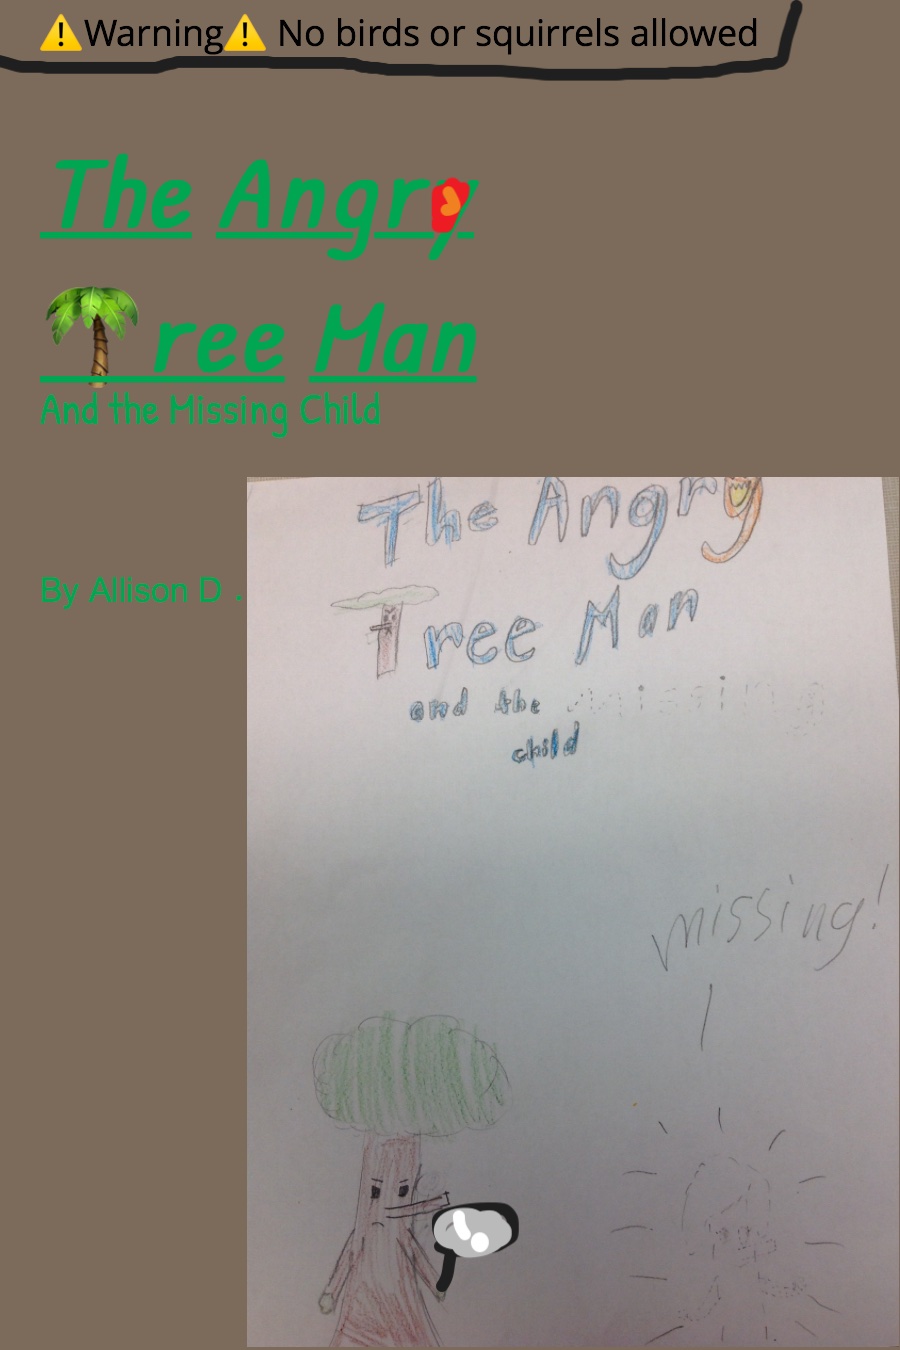 The Angry Tree Man and the Missing Child by Allison D